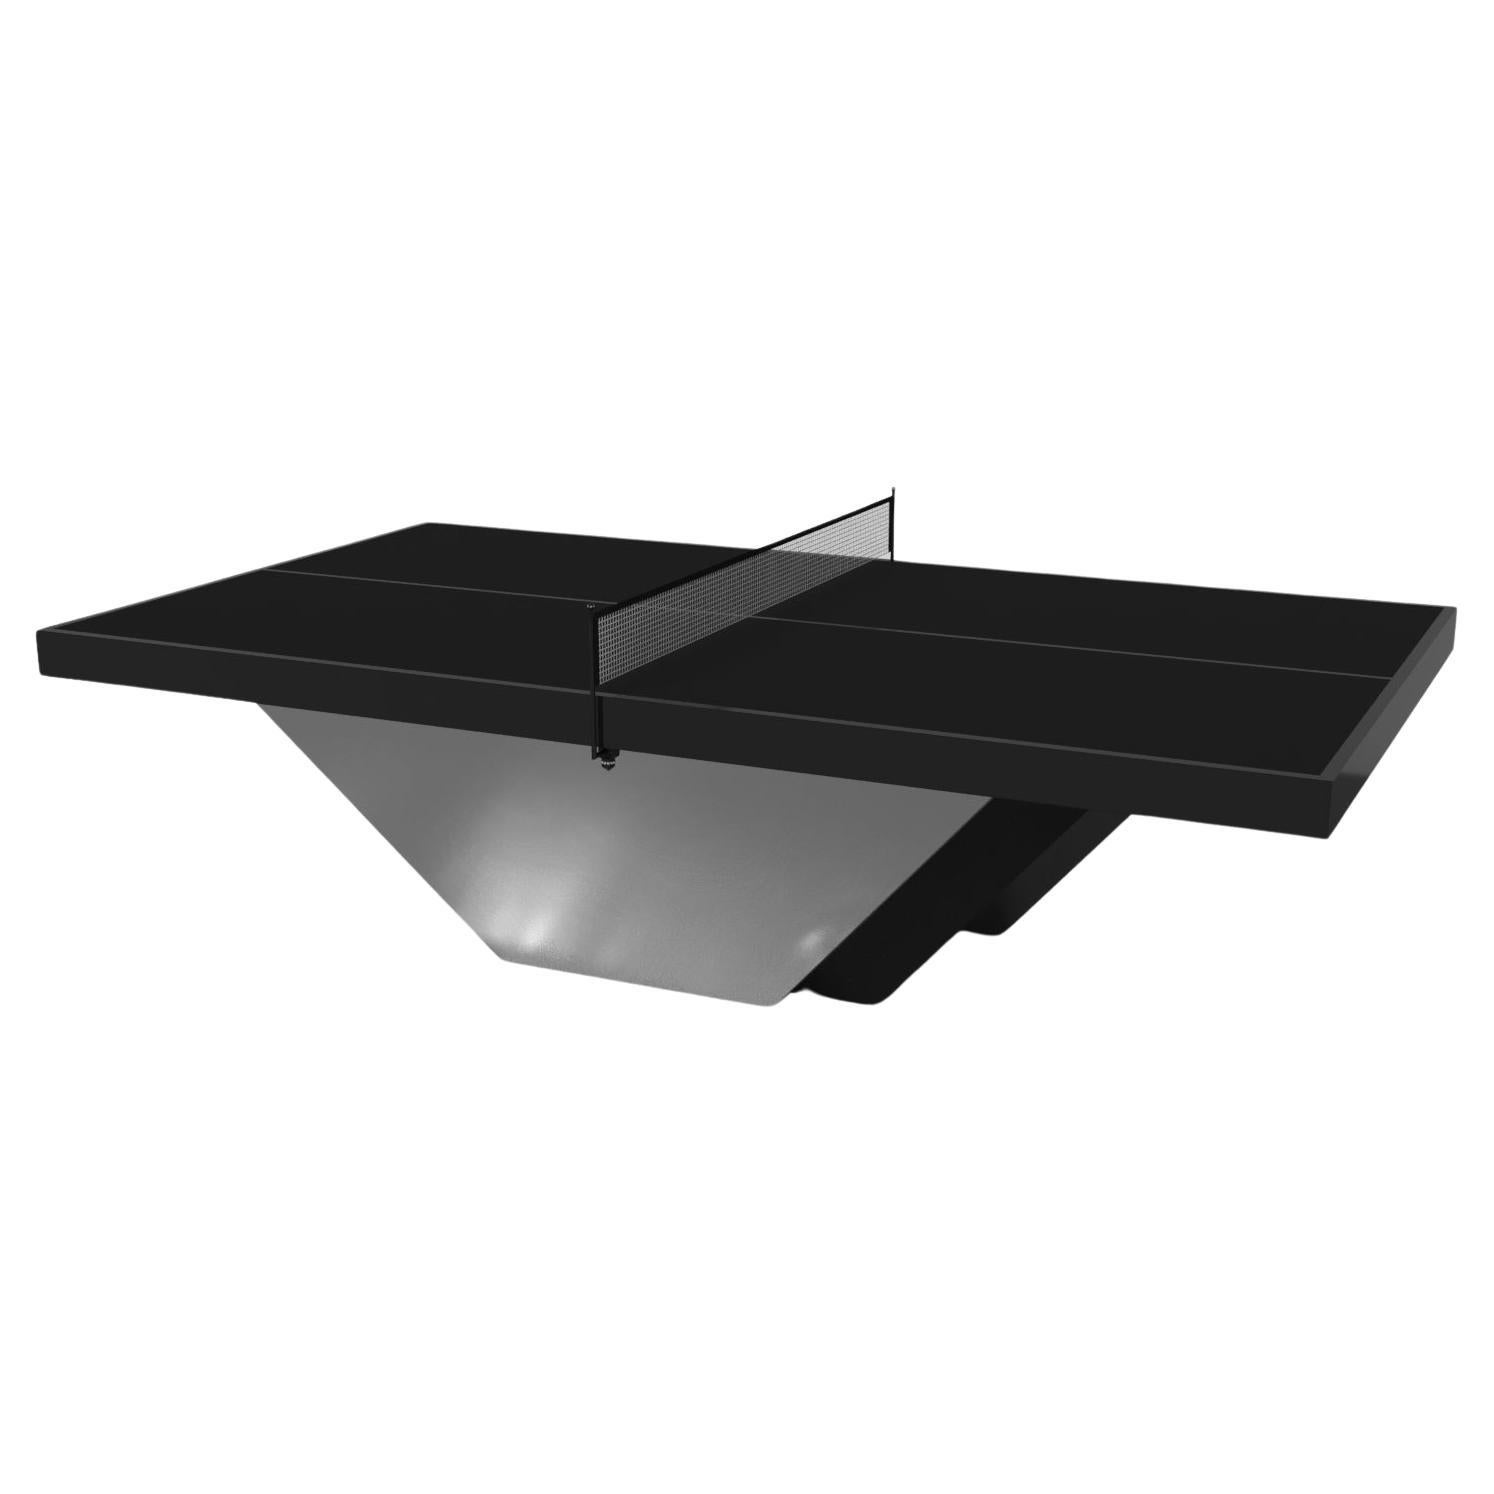 Elevate Customs Vogue Tennis Table /Solid Pantone Black Color in 9' -Made in USA For Sale